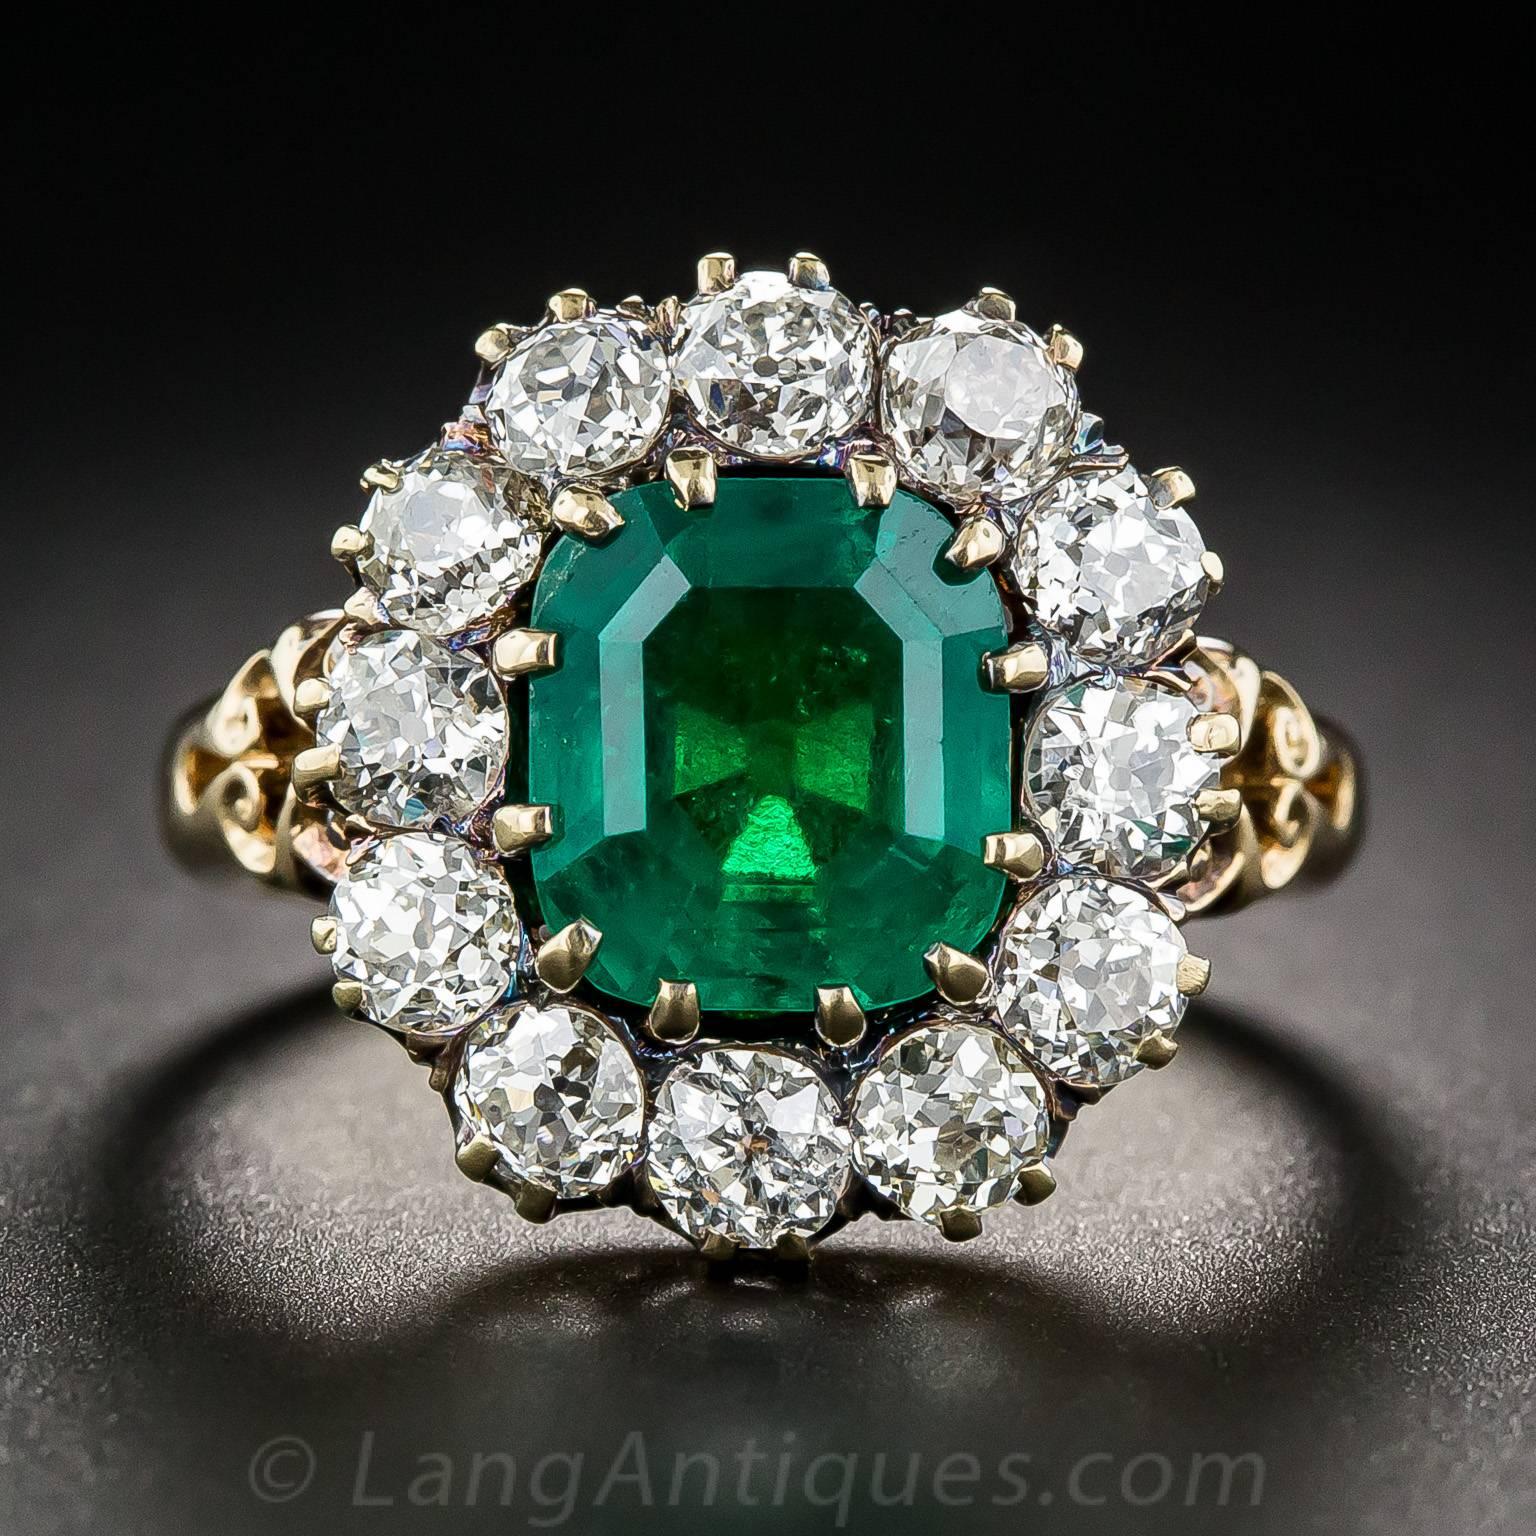 A rich, gorgeous, luscious green Colombian emerald, faceted in a modified emerald-cut shape and weighing 2.75 carats, is framed in a sparkling halo of bright white old European-cut diamonds.  This classic late-Victorian style ring is hand-fabricated